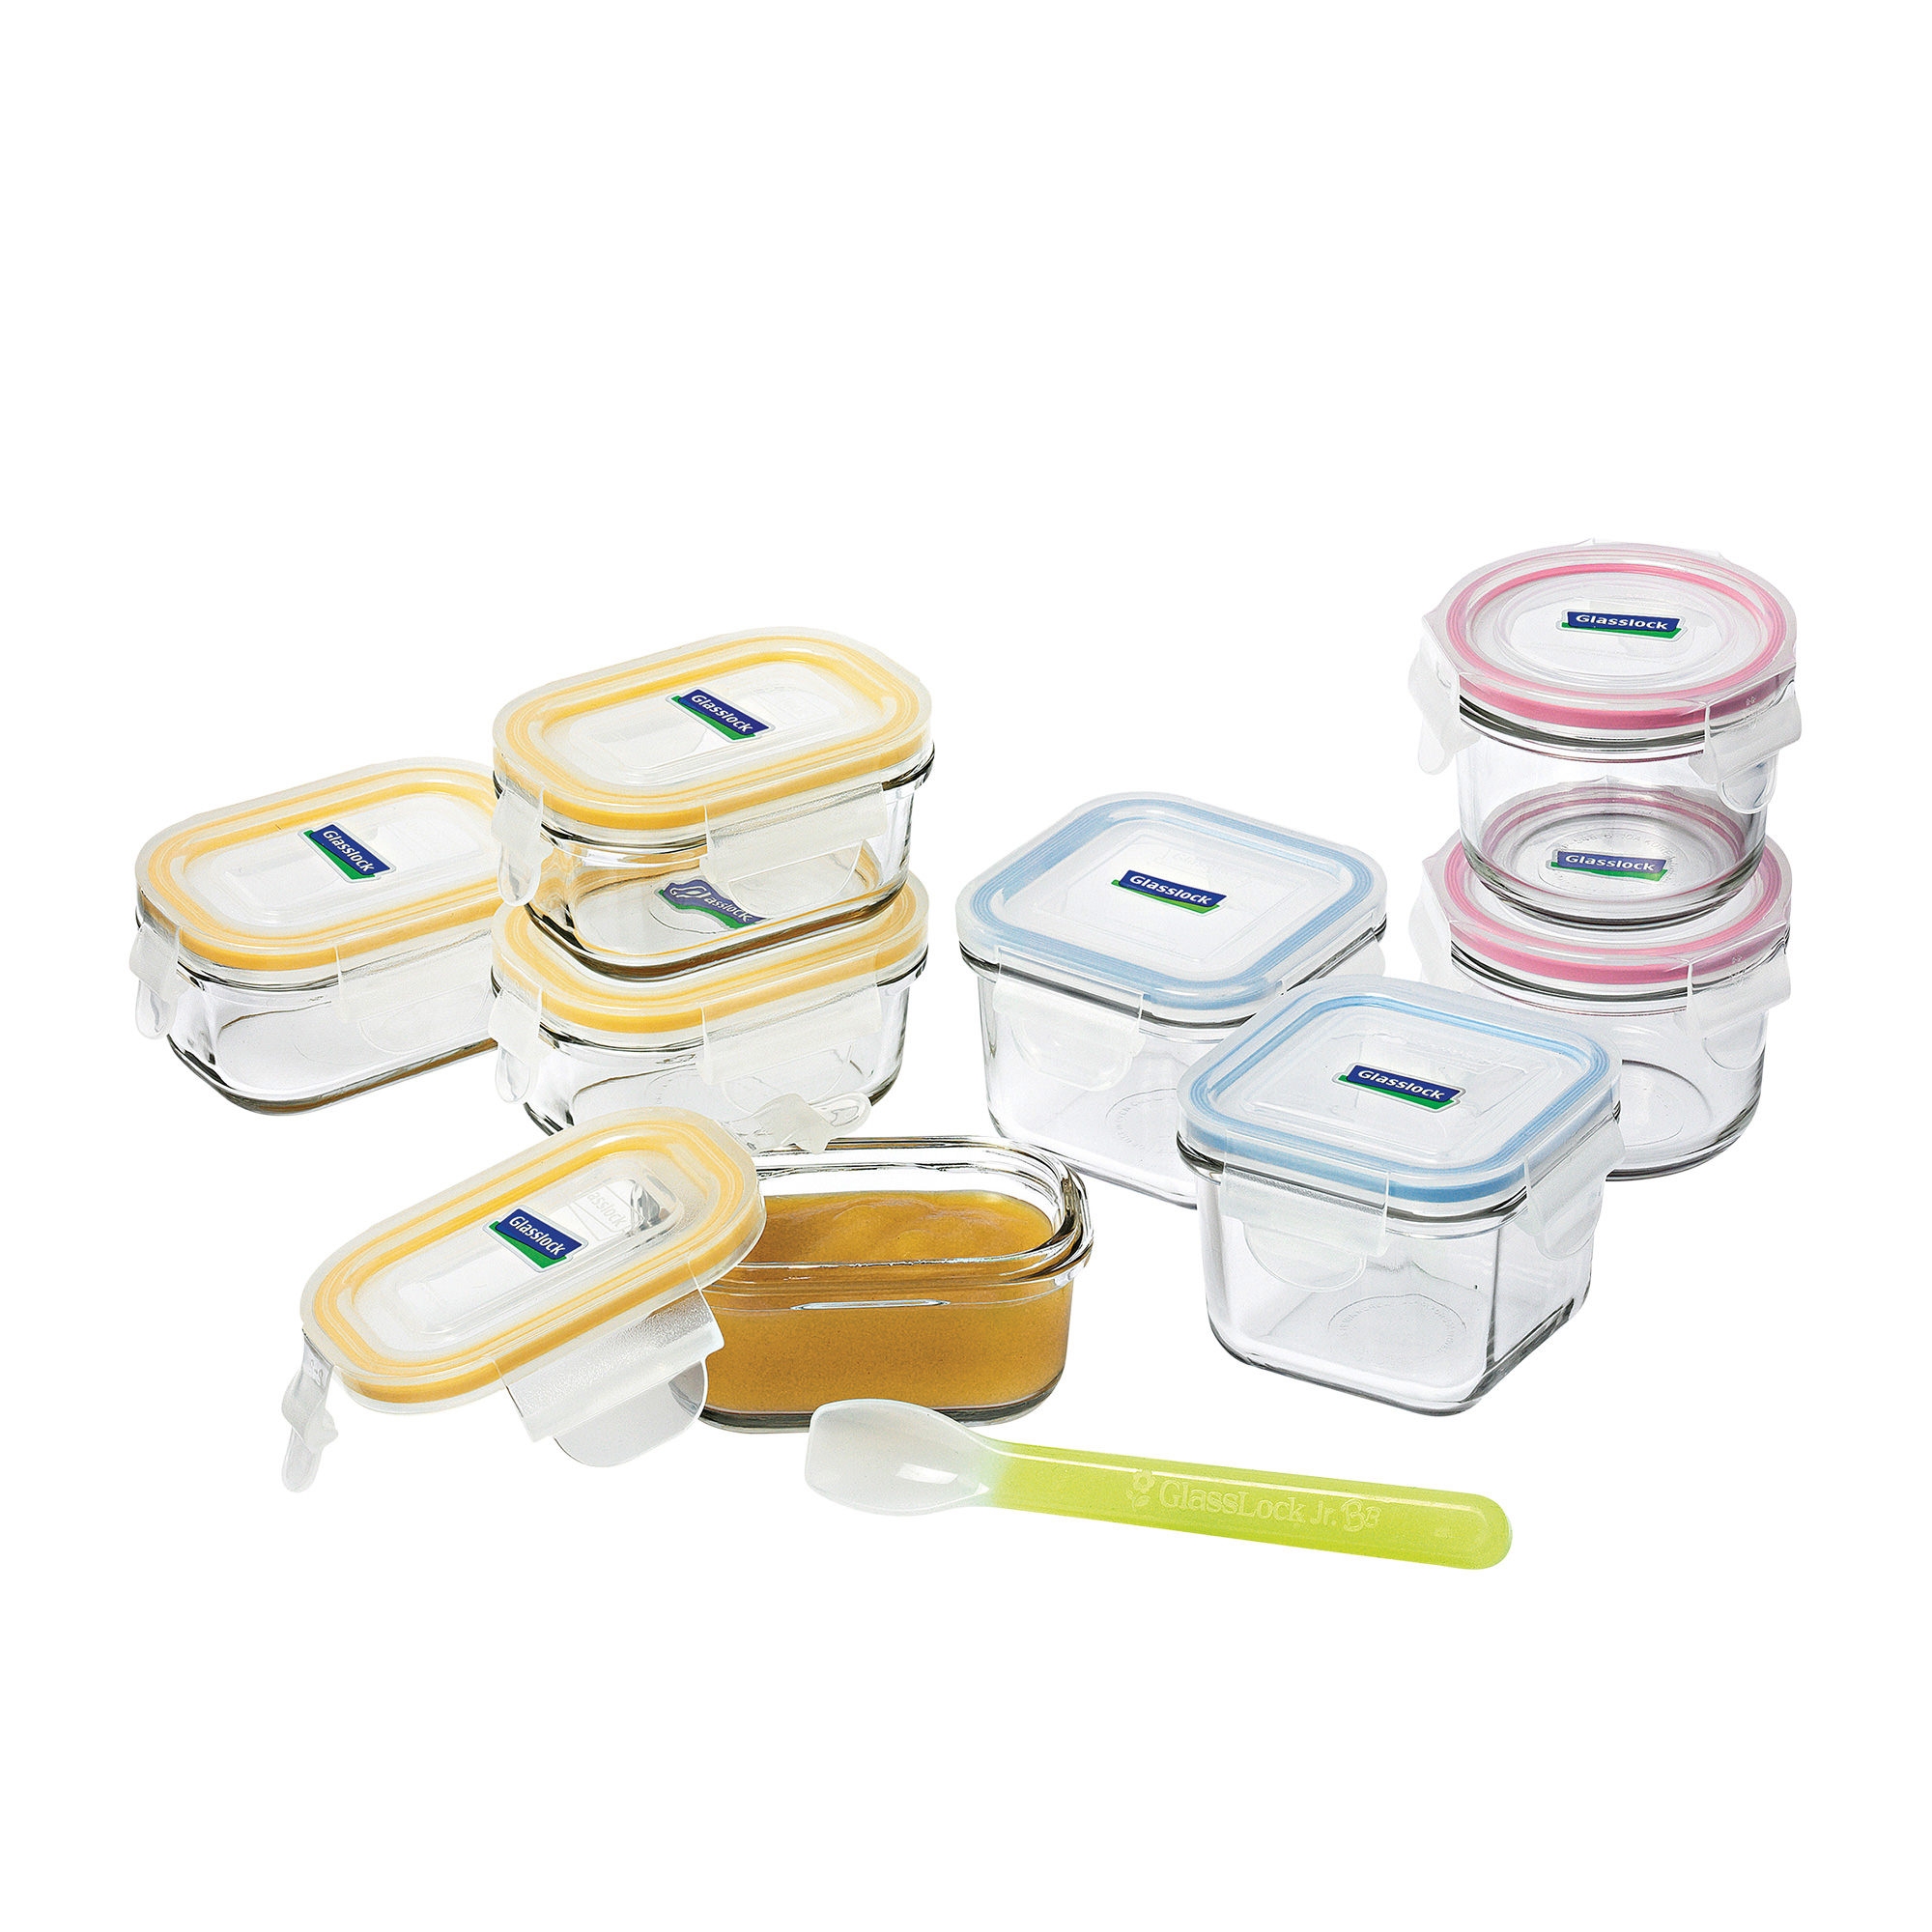 Glasslock Baby Food Container Set 9pc with Spoon Image 1